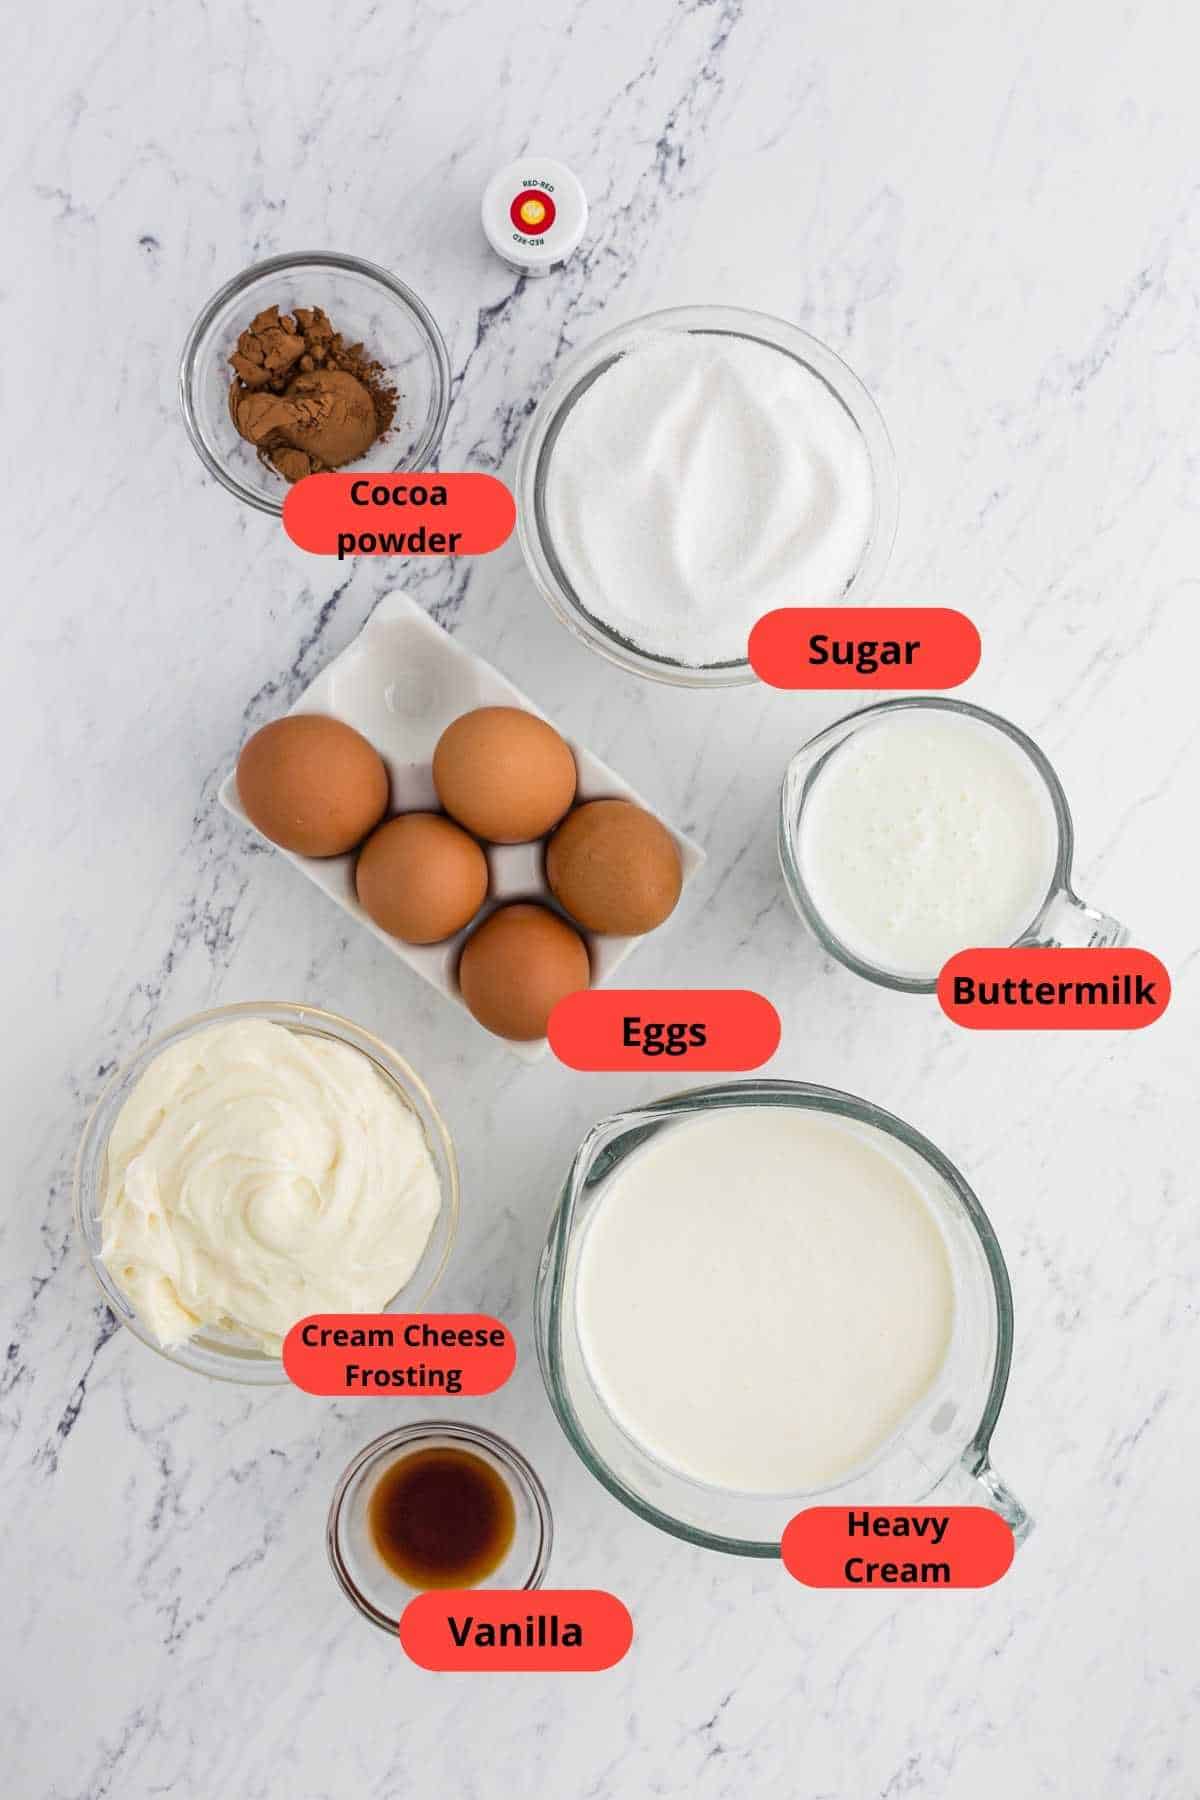 Several ingredients in small glass bowls to make an ice cream recipe